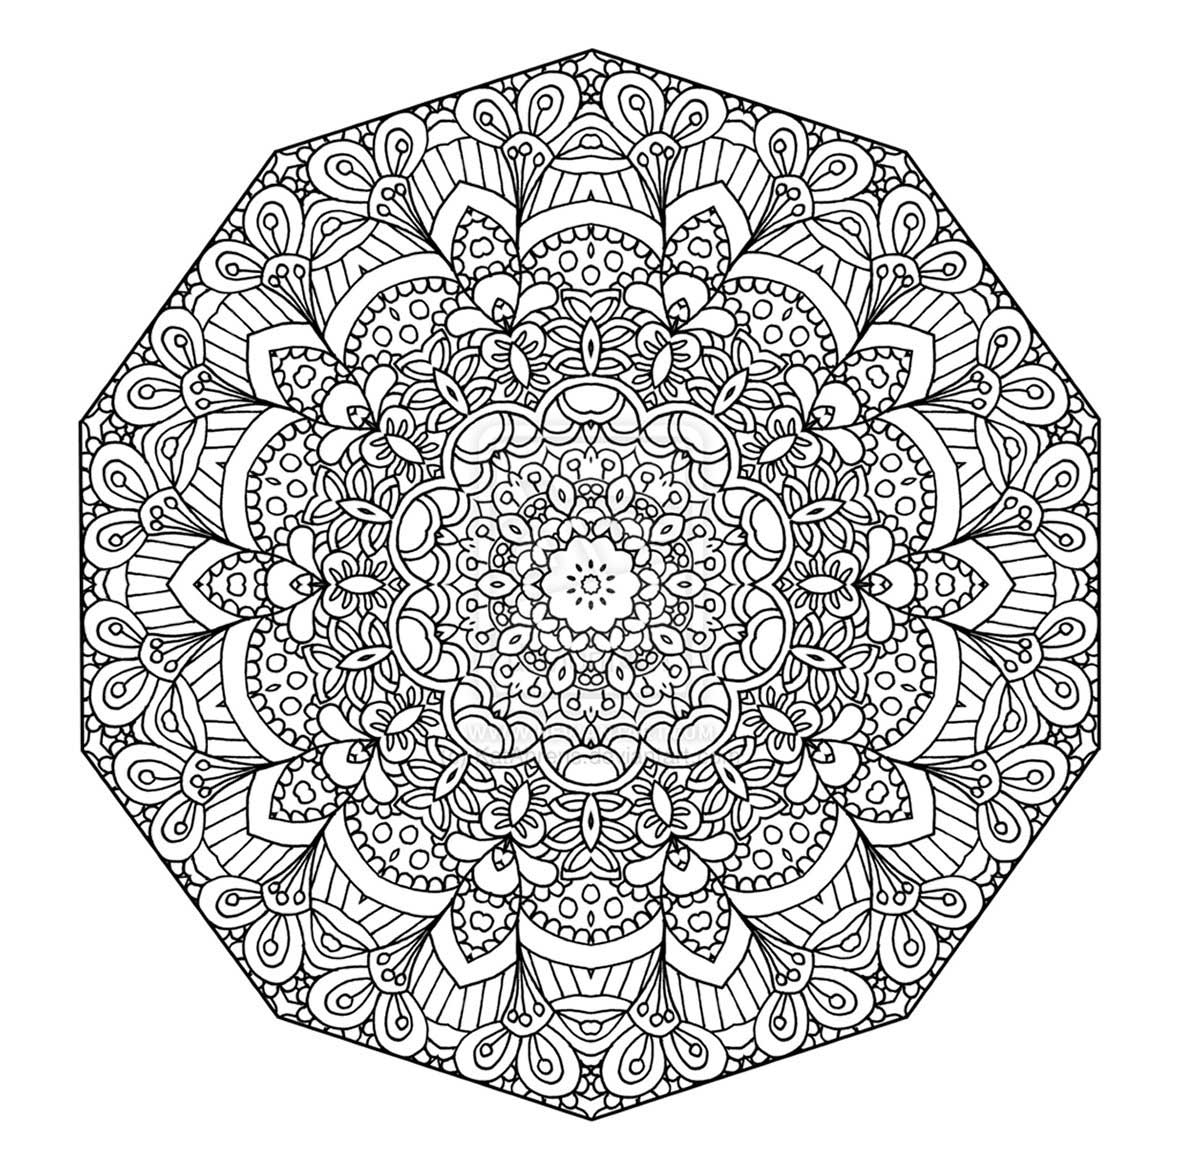 Free Intricate Coloring Pages Image 12 - Gianfreda.net